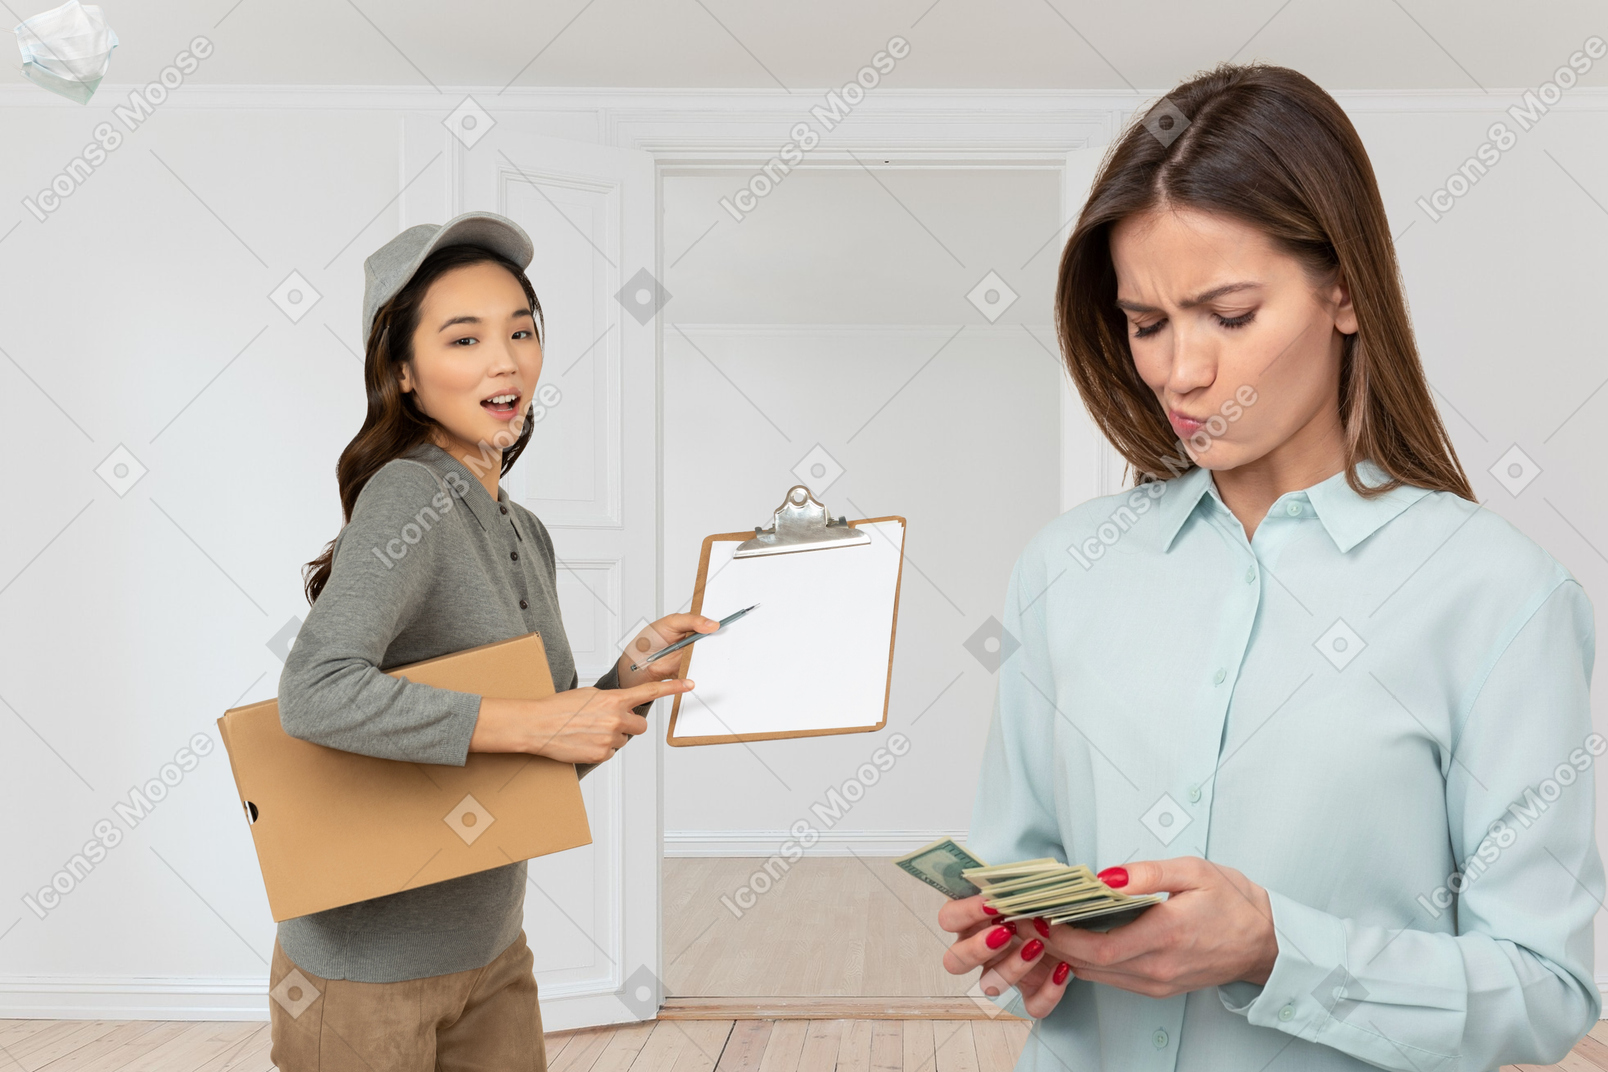 A woman with package and a clipboard standing next to a woman counting money